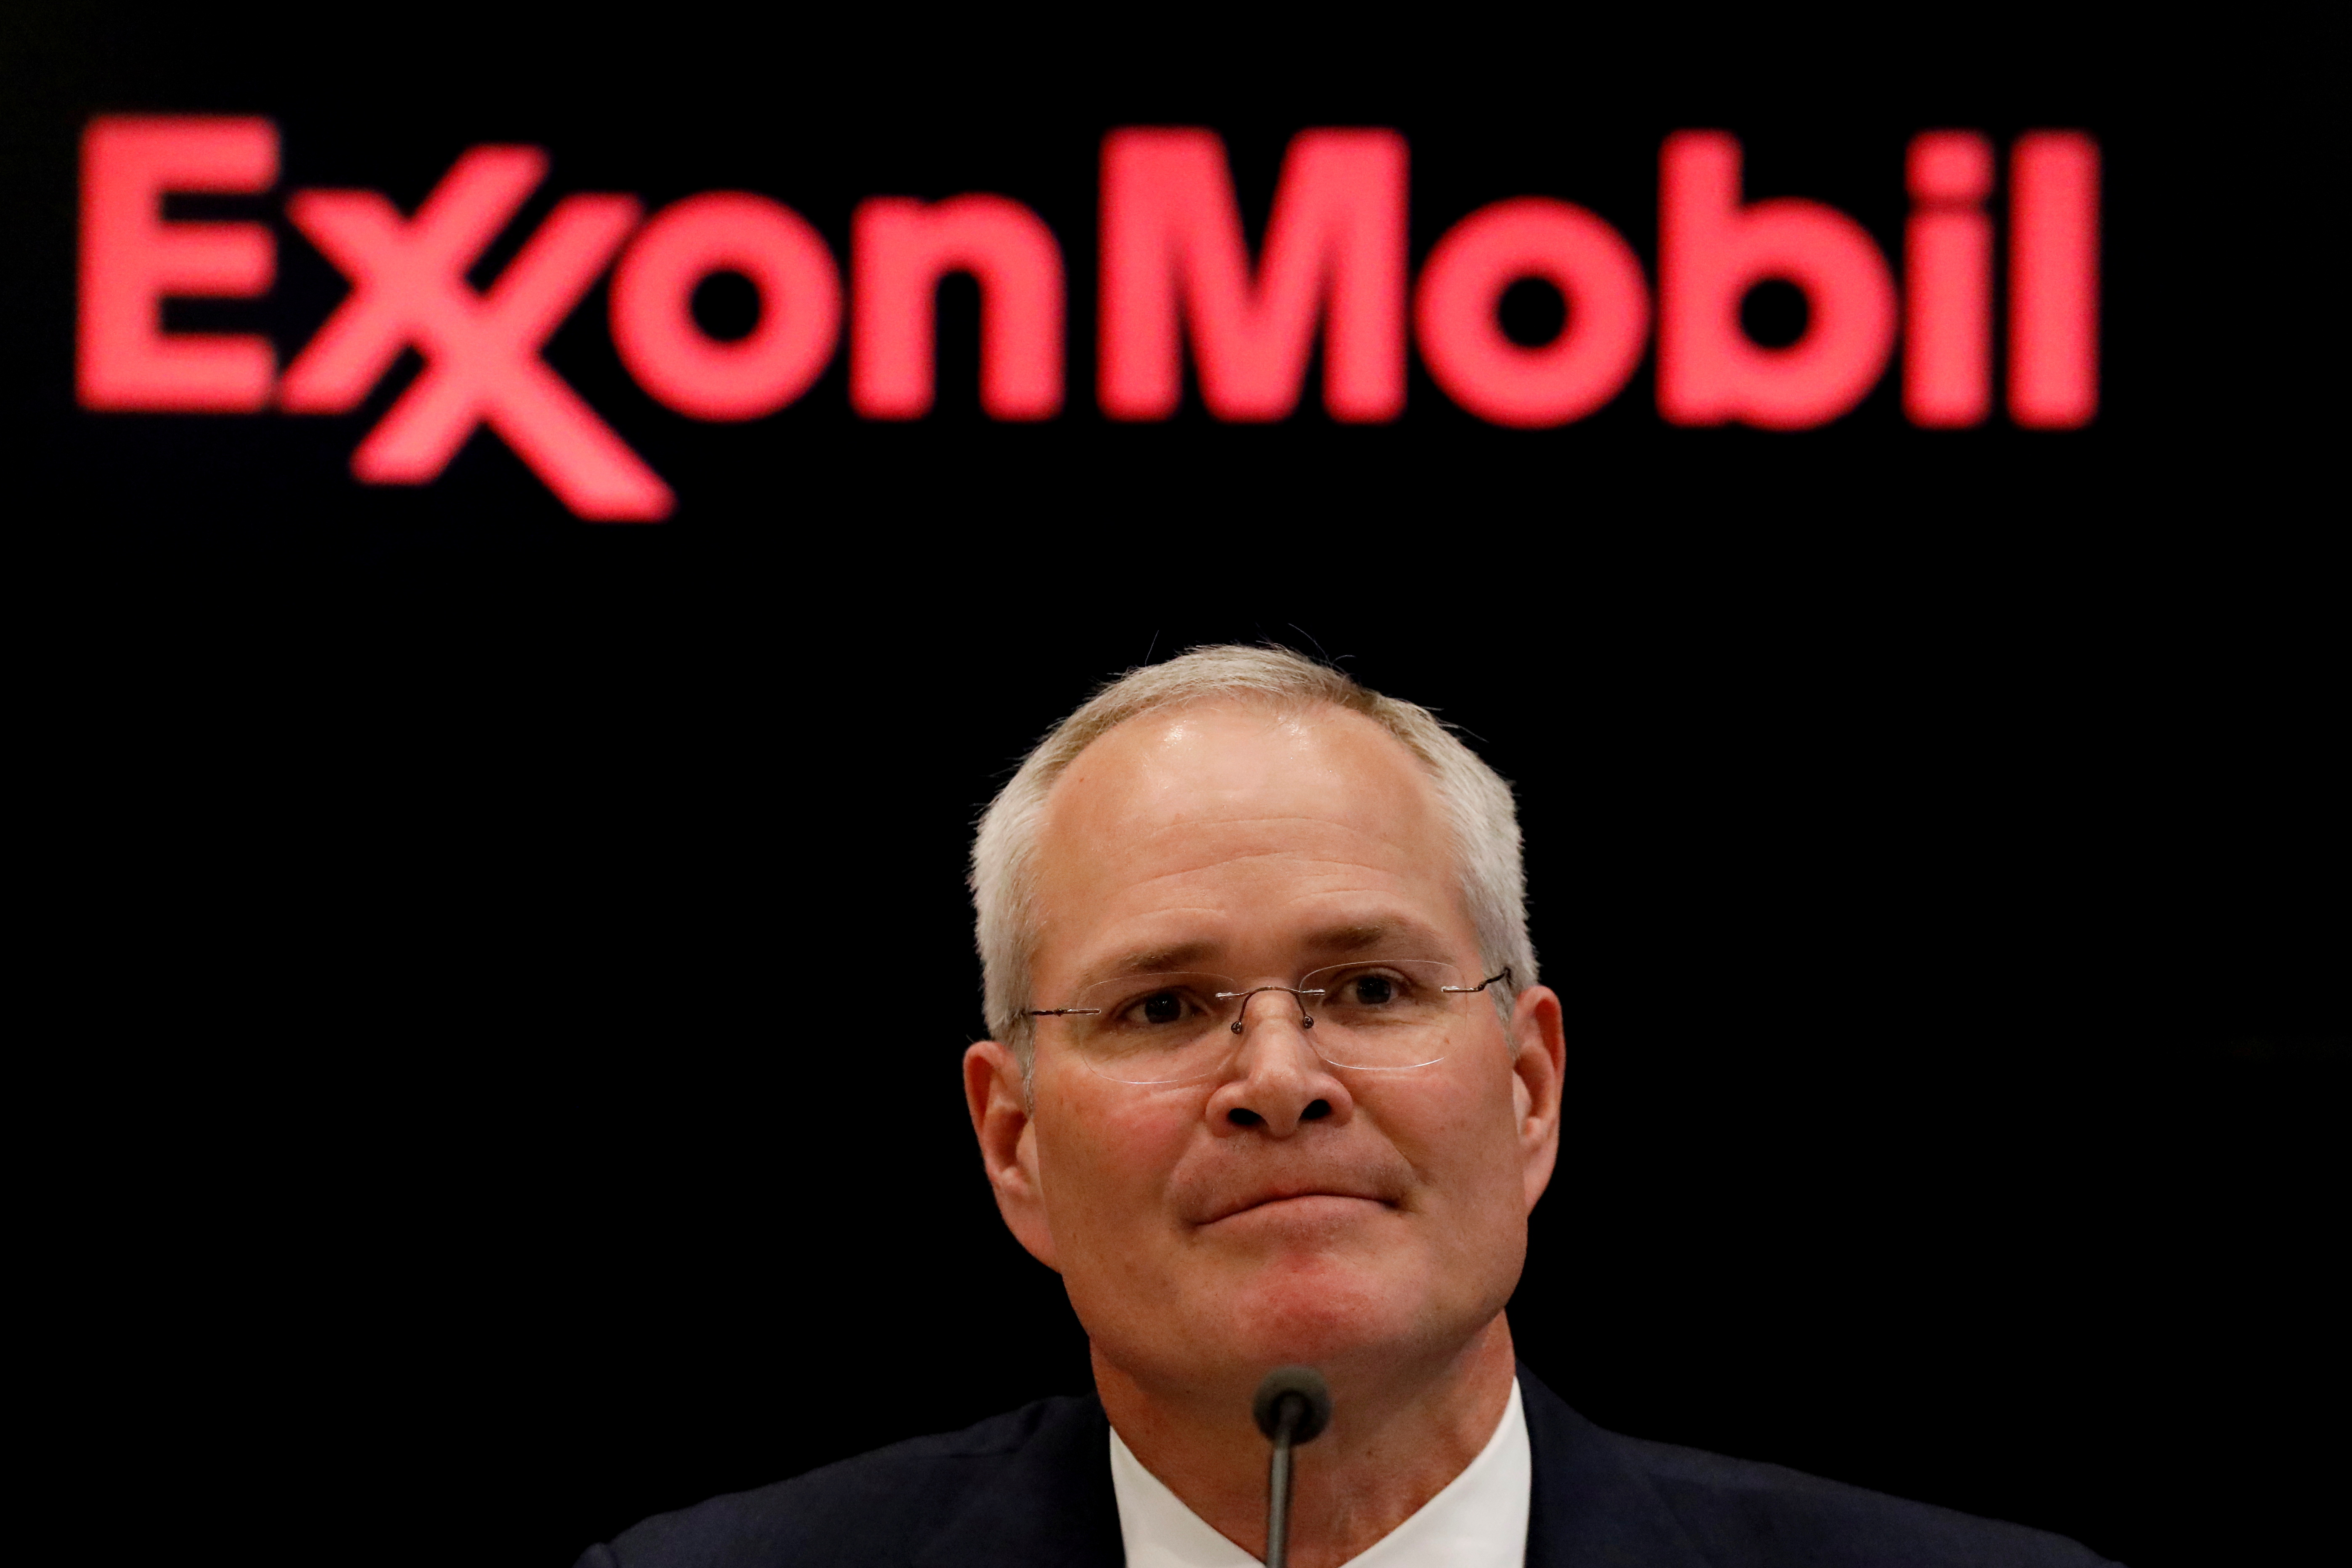 Darren Woods, Chairman & CEO, Exxon Mobil Corporation attends a news conference at the NYSE